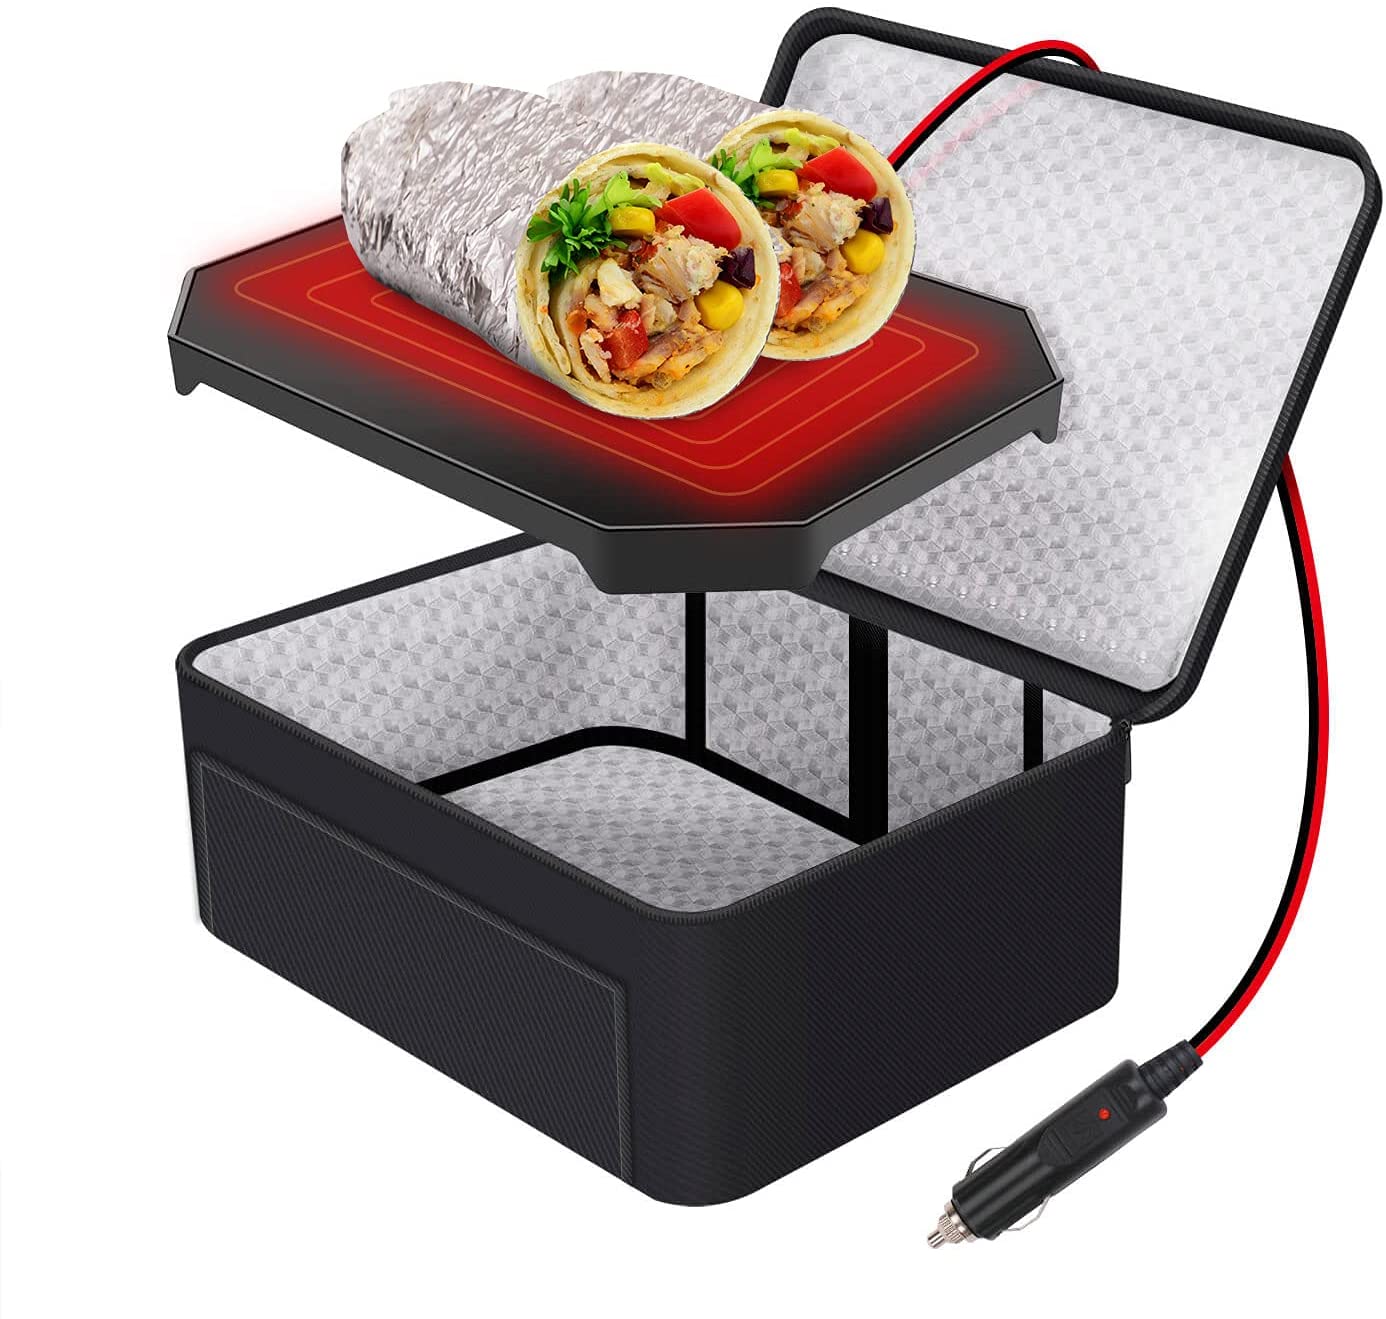 Aotto Portable Food Warmer Best Travel Microwave